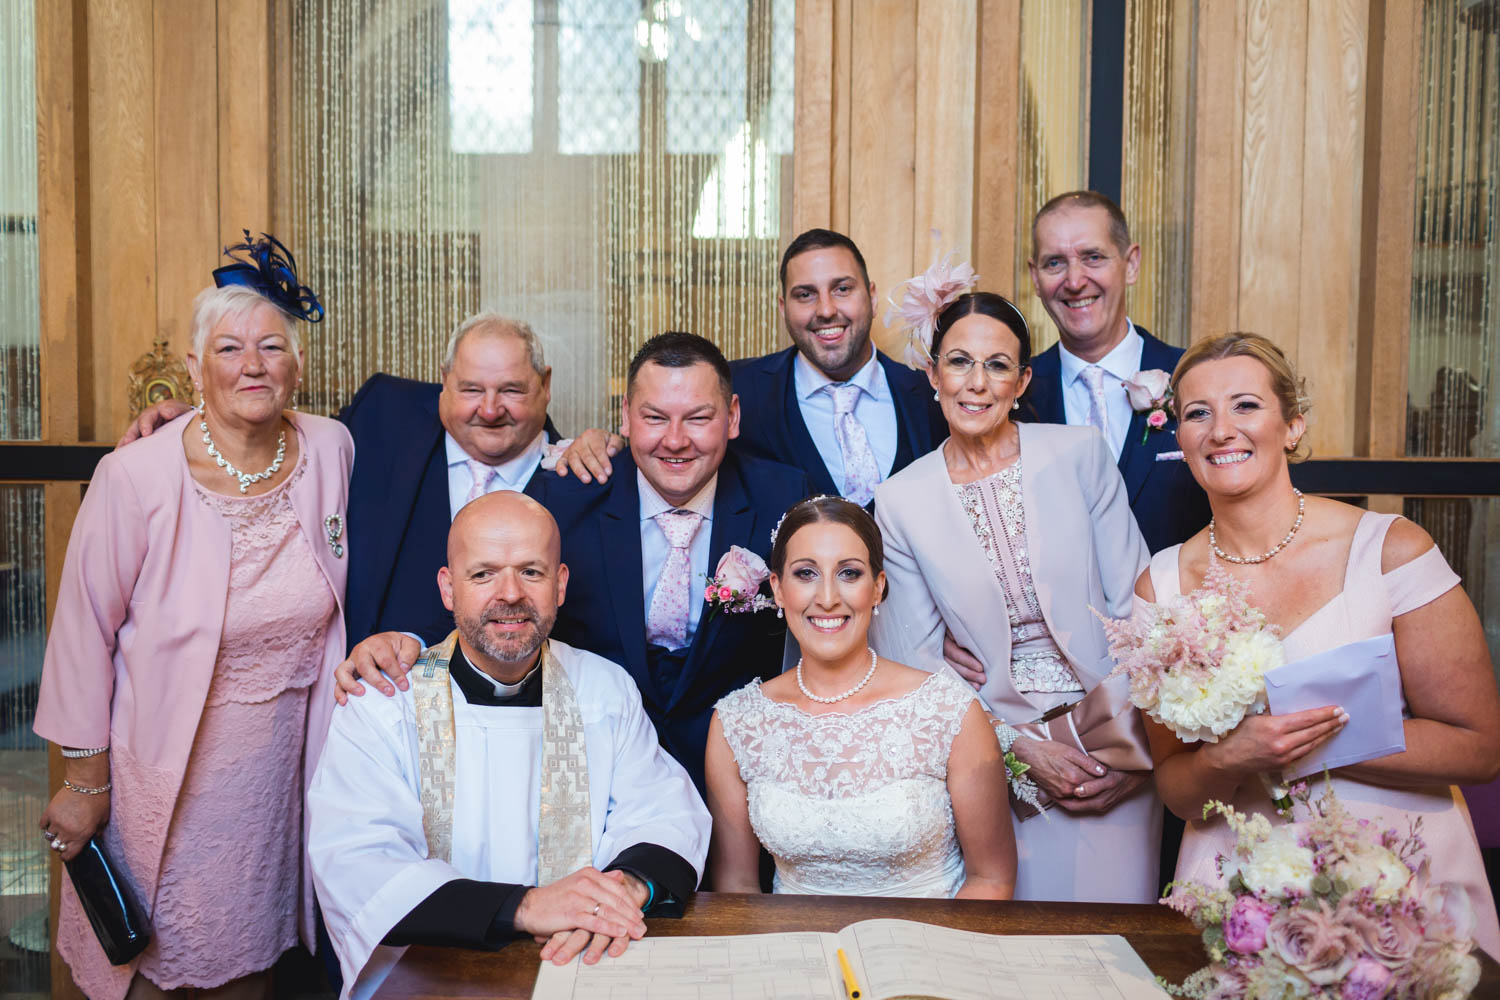 Signing of the register group shot at St Martins church Caerphilly with south wales wedding photographer